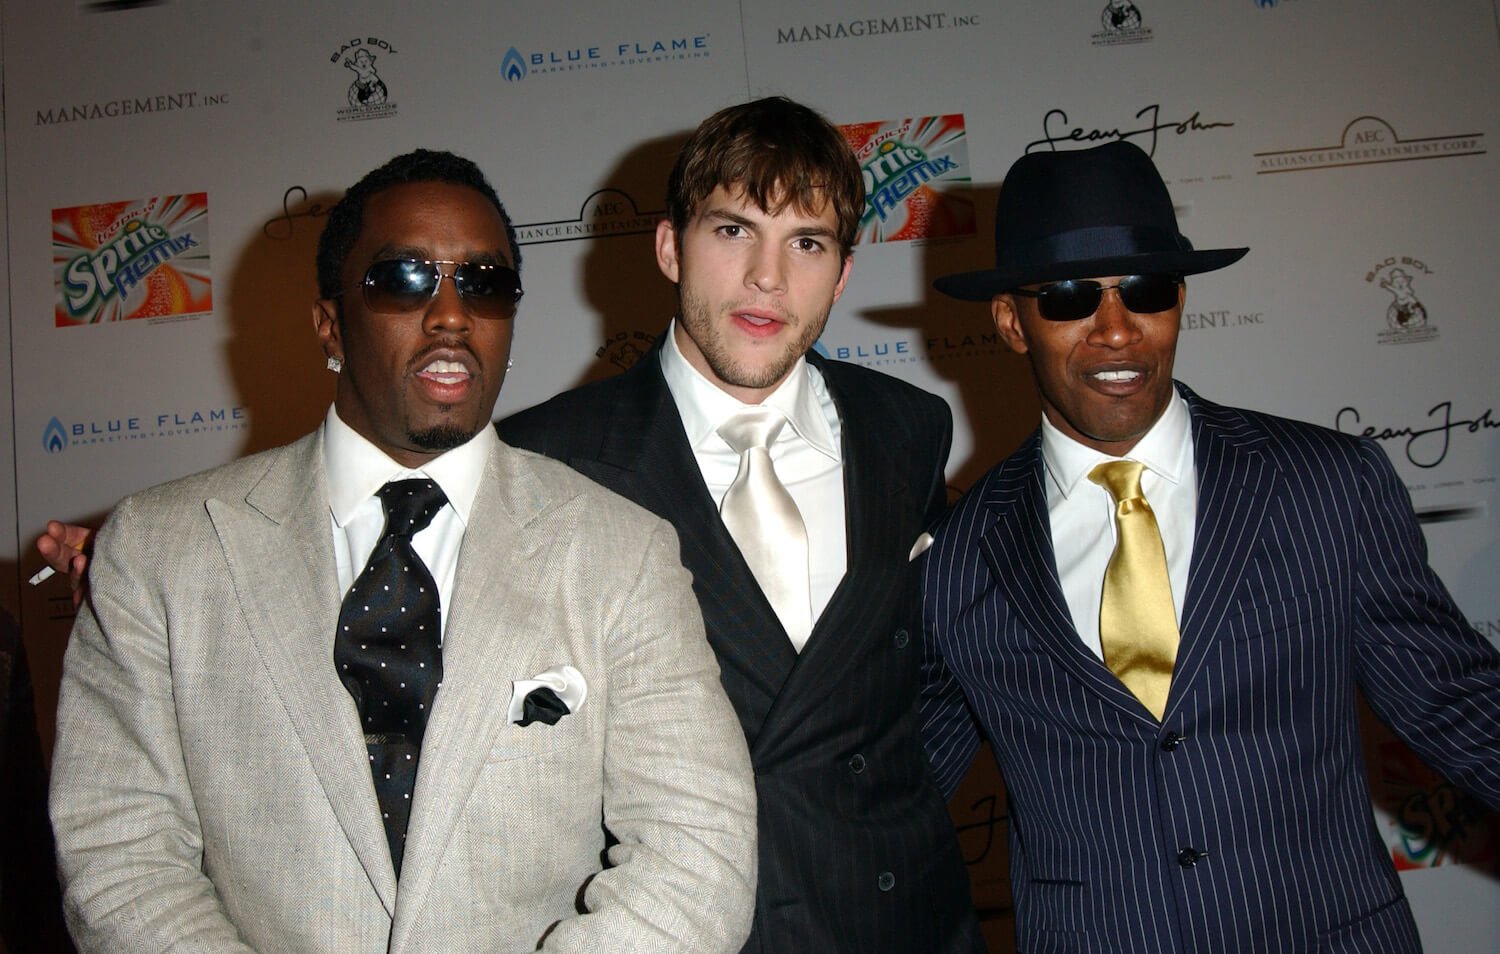 Sean 'P. Diddy' Combs, Ashton Kutcher, and Jamie Foxx posing together